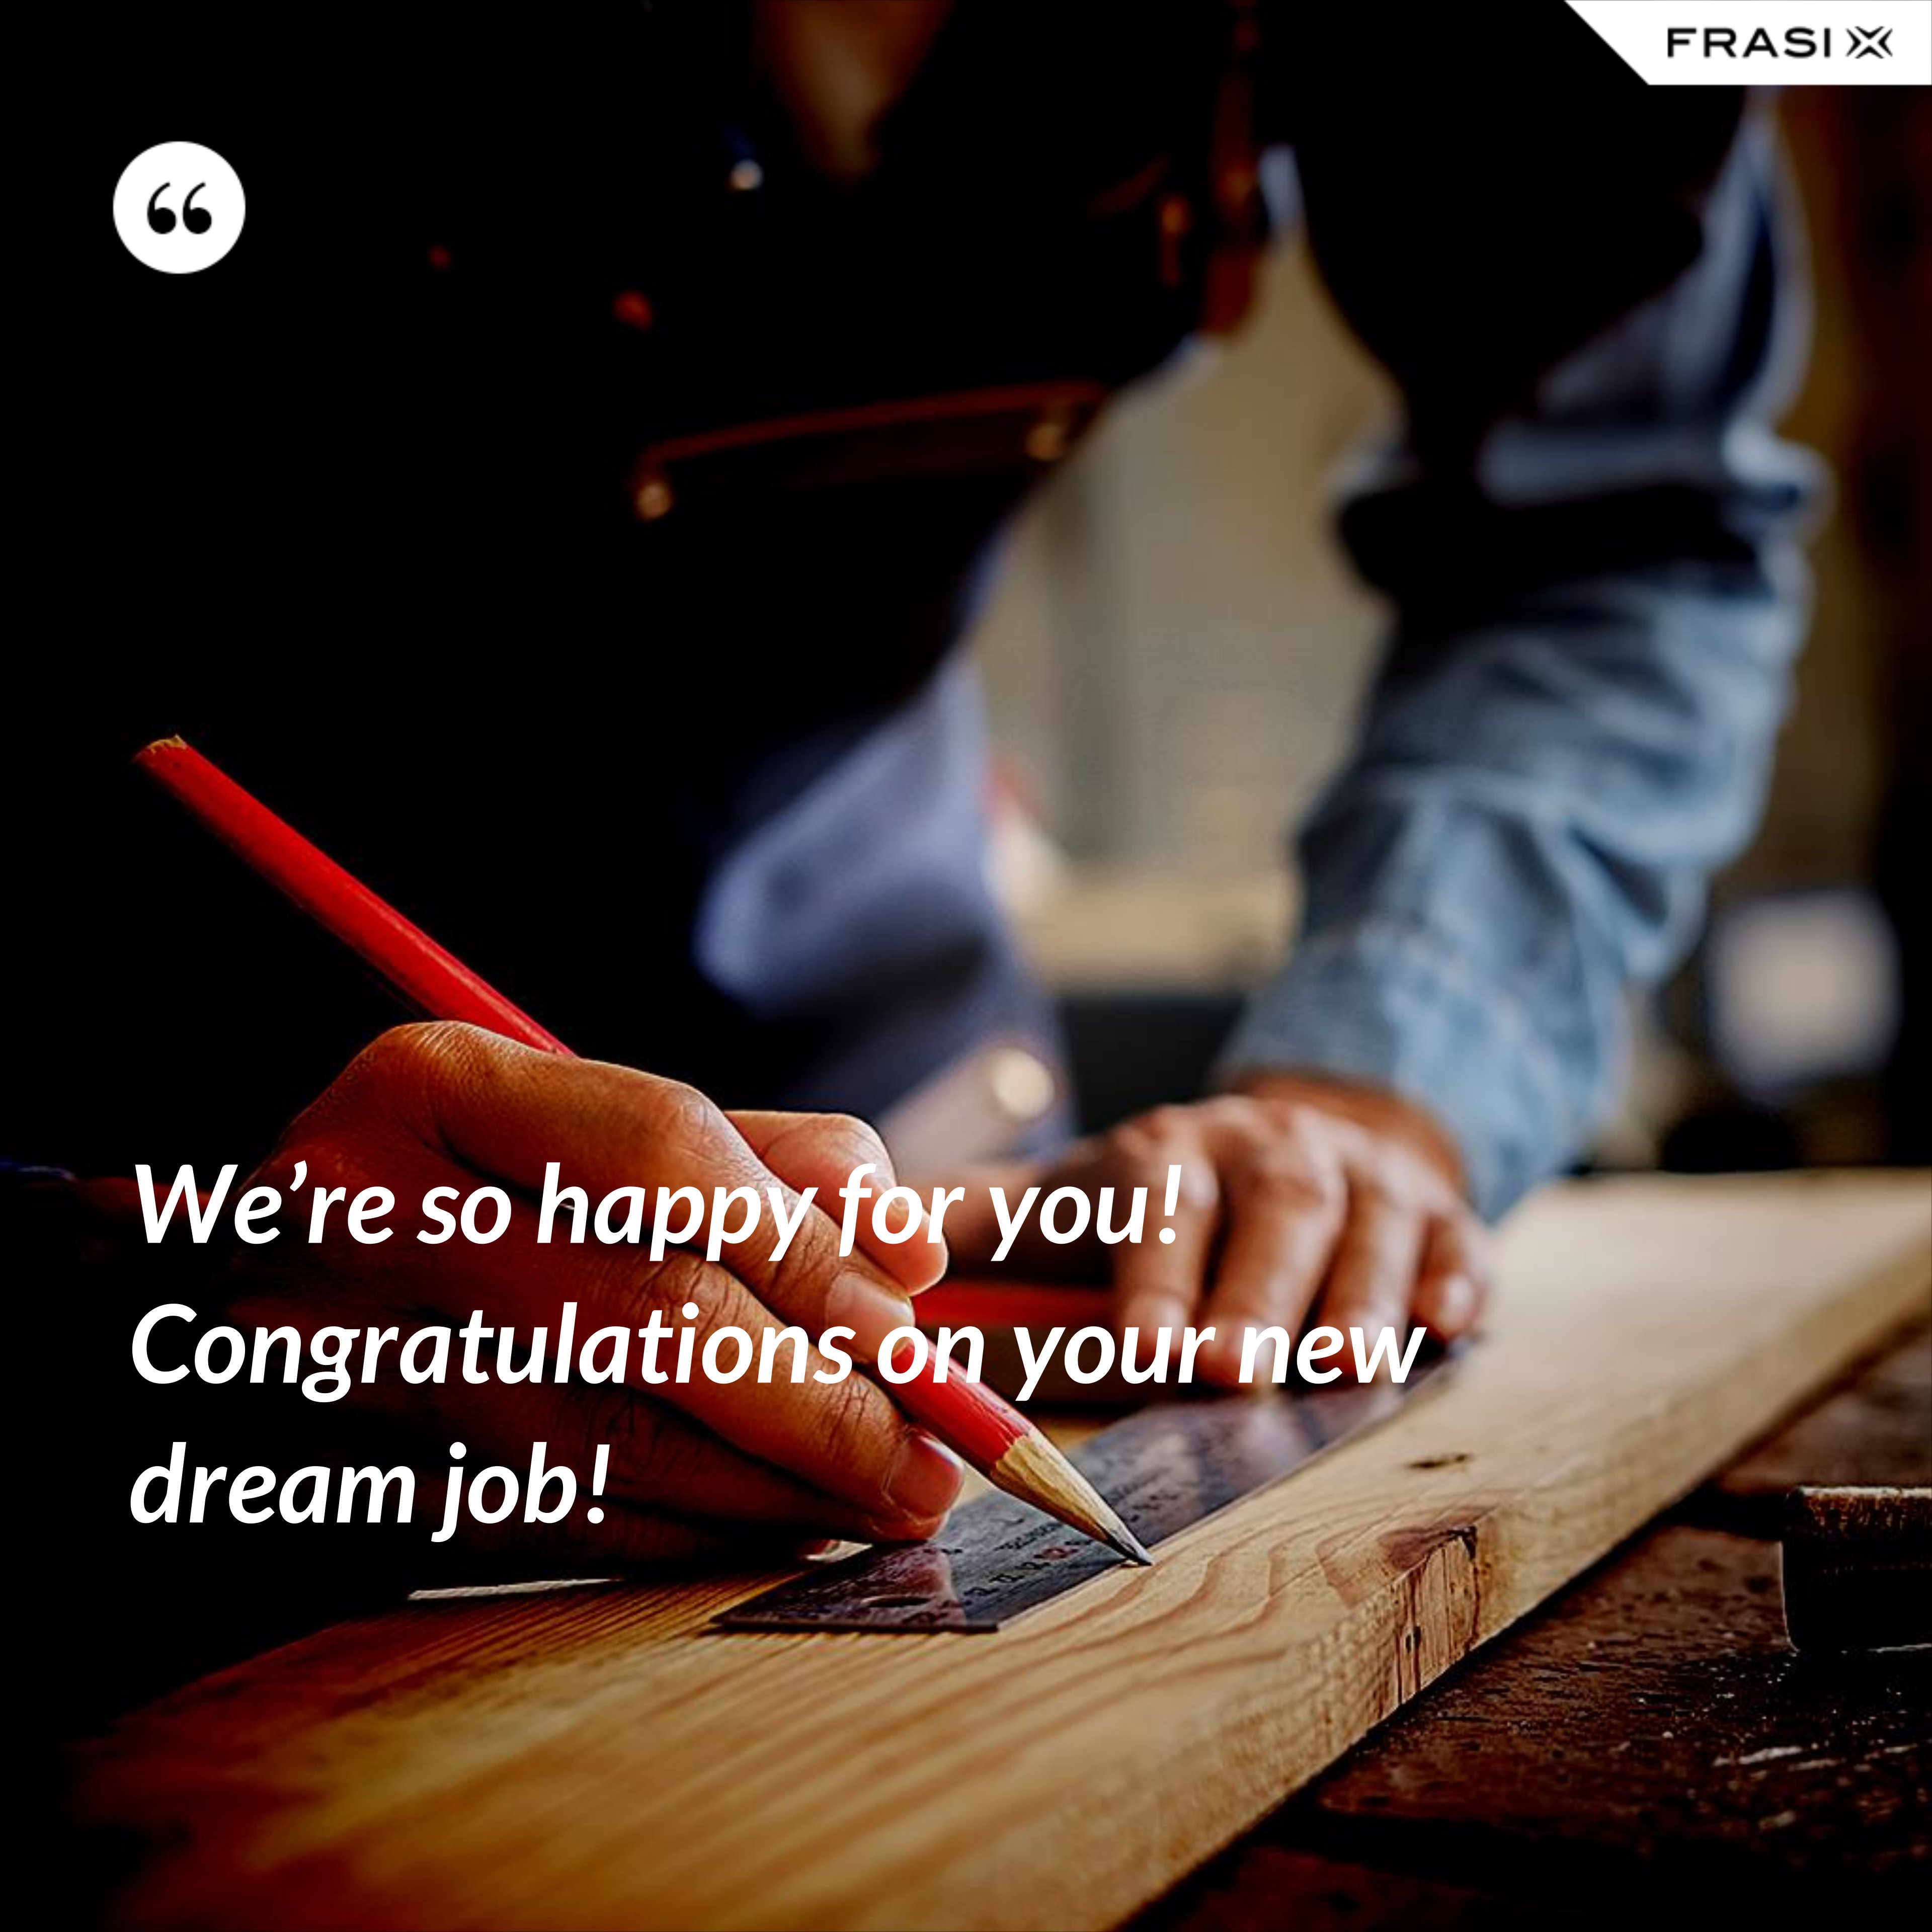 We’re so happy for you! Congratulations on your new dream job! - Anonimo